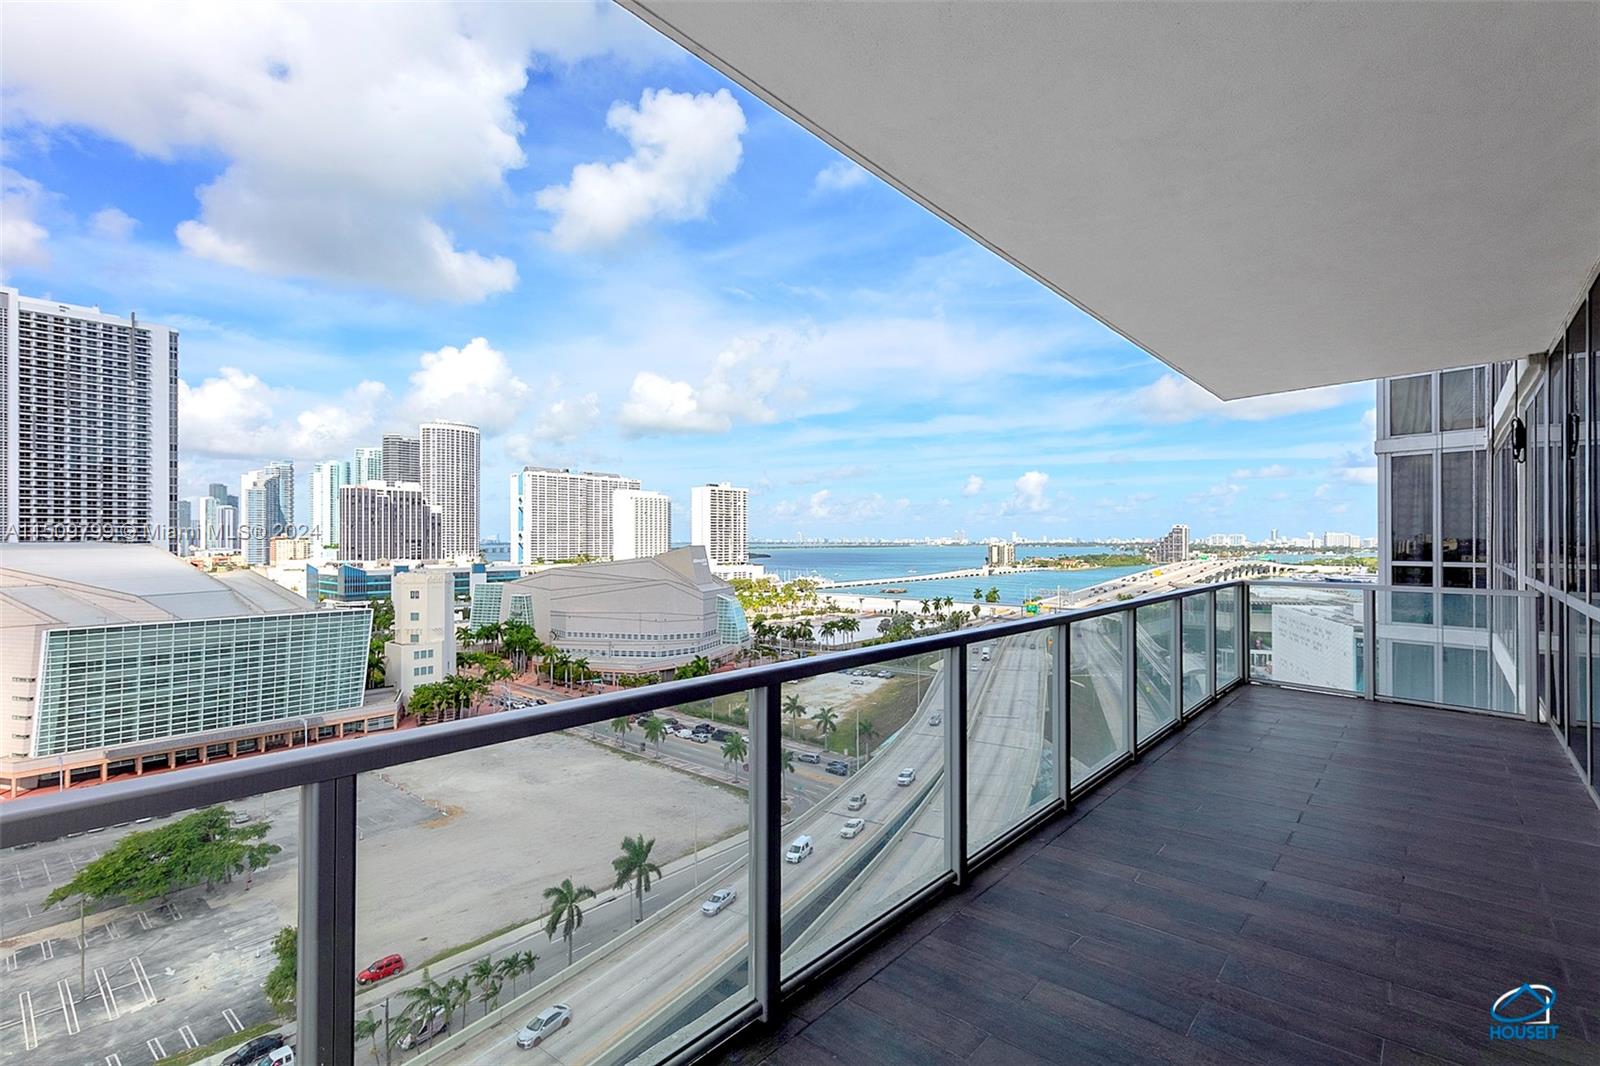 Price just reduced, seller wants to close B4 end of FEB.  Comfortable 1,647 SqFt of living space. 2b/2.5ba.  Breathtaking panoramic bay & city views, soaring 10ft Floor to ceiling windows, Huge 213 SF terrace.  This residence boasts the most picturesque backdrop of Miami and the Beaches.  Private elevators open into your very own over sized foyer. modern kitchen w/high glossed lacquered cabinetry added for extra Storage & luxury appliances. Remote shades throughout. Ceramic floors.  Flush-based walls. Euro-style bathroom fixtures & finishes. Sub-zero wine chiller. Resort like building boasts state of the art fitness center, spa, 2 pools, cabanas, lounge & restaurant, hotel services, clubroom w/gourmet kitchen.  HOA includes storage, h2o, Wifi & cable.  Seller may accept crypto currencies